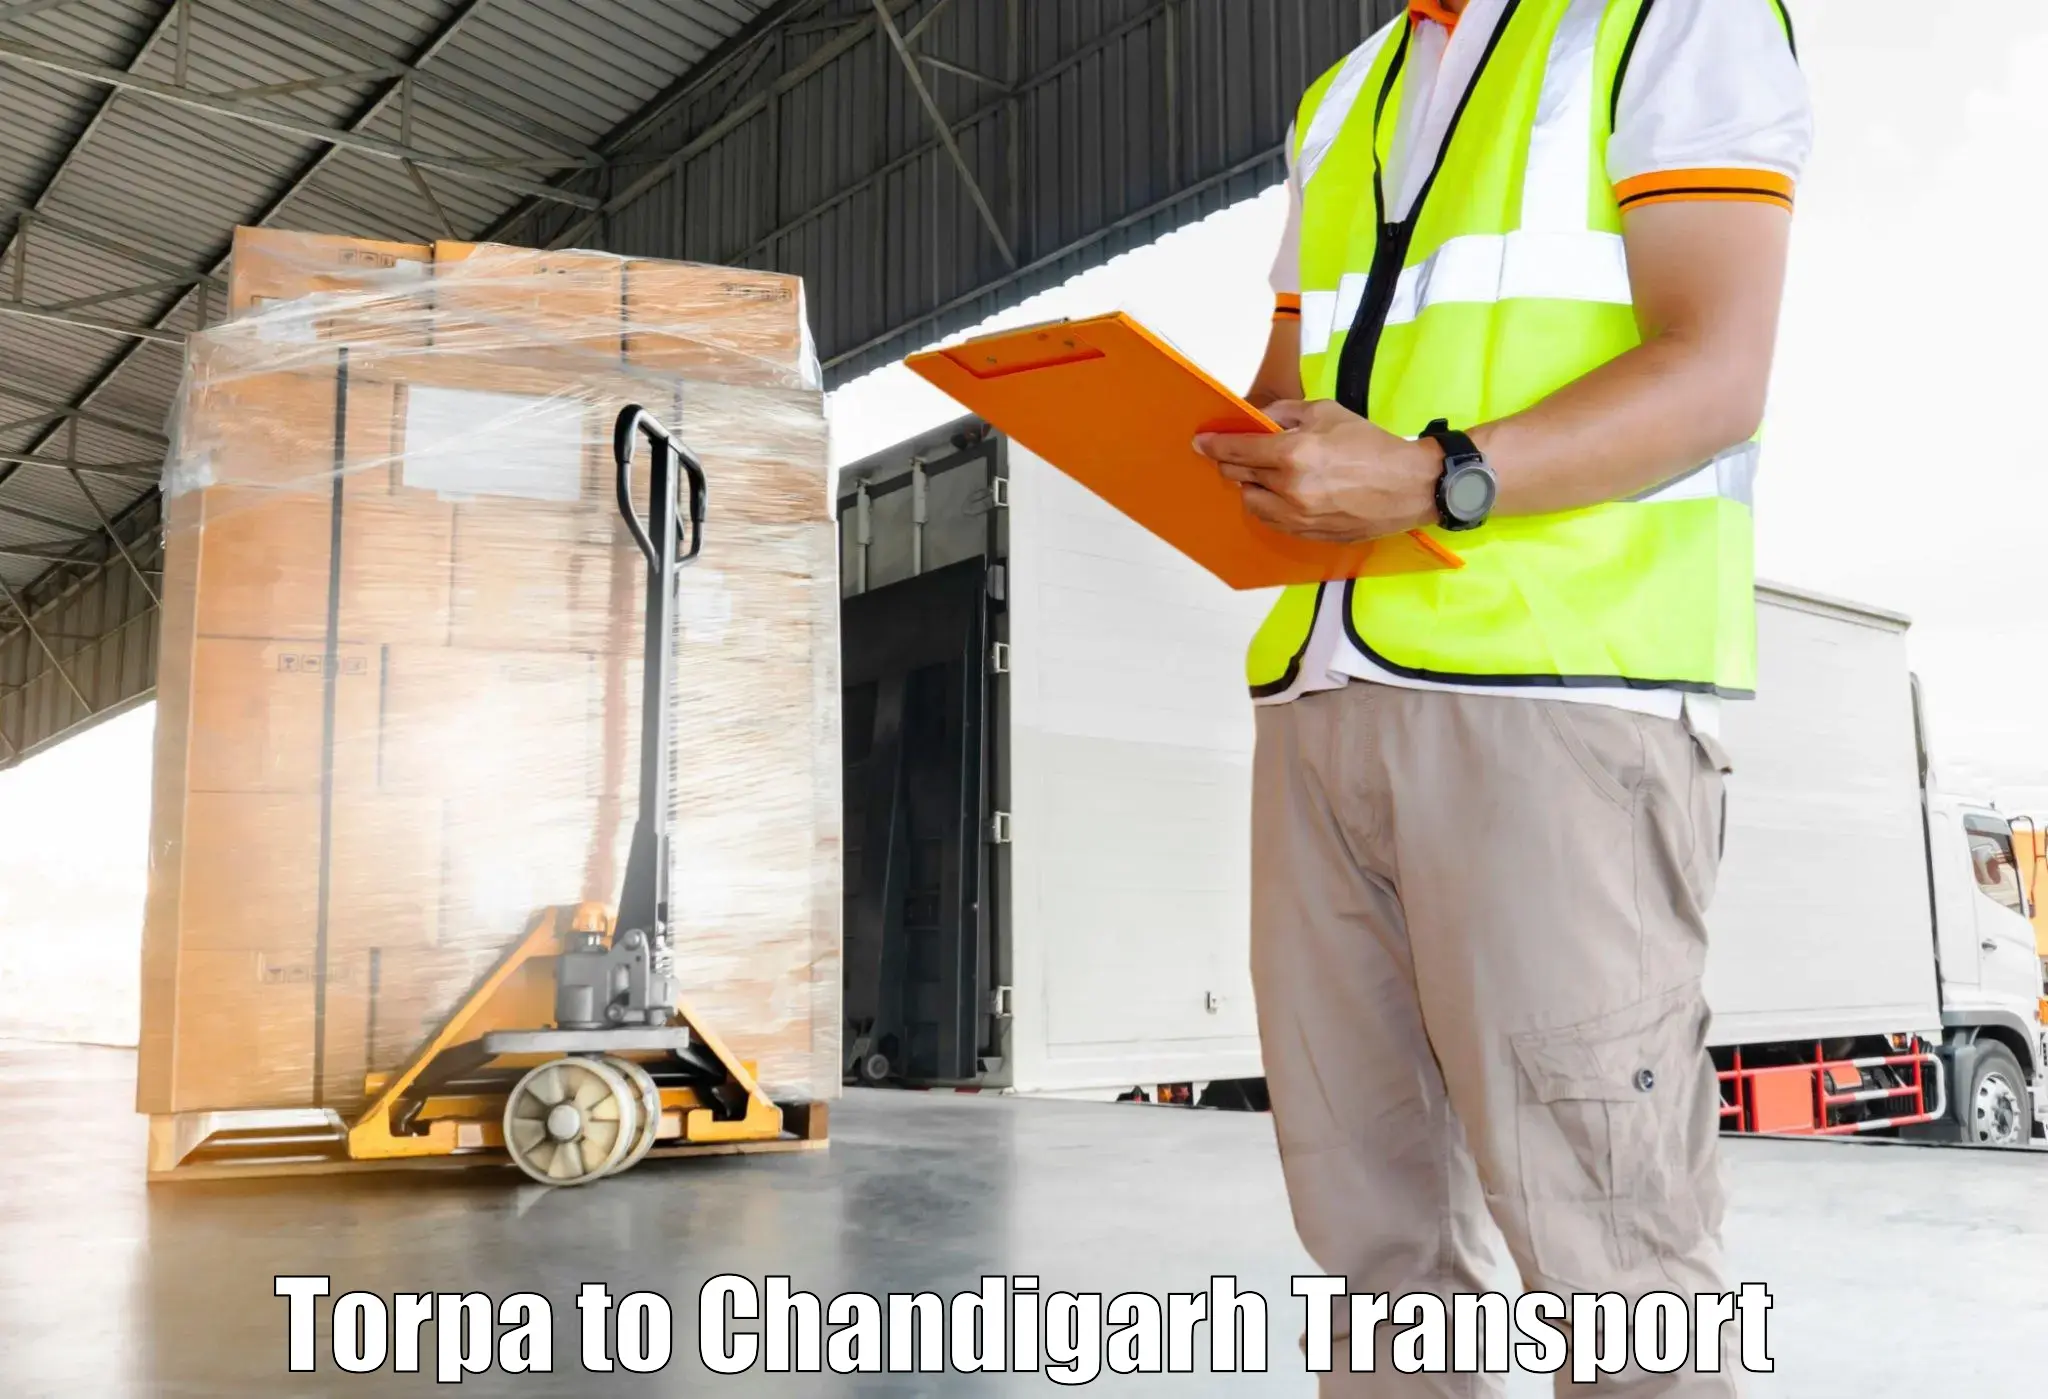 Transport in sharing in Torpa to Chandigarh